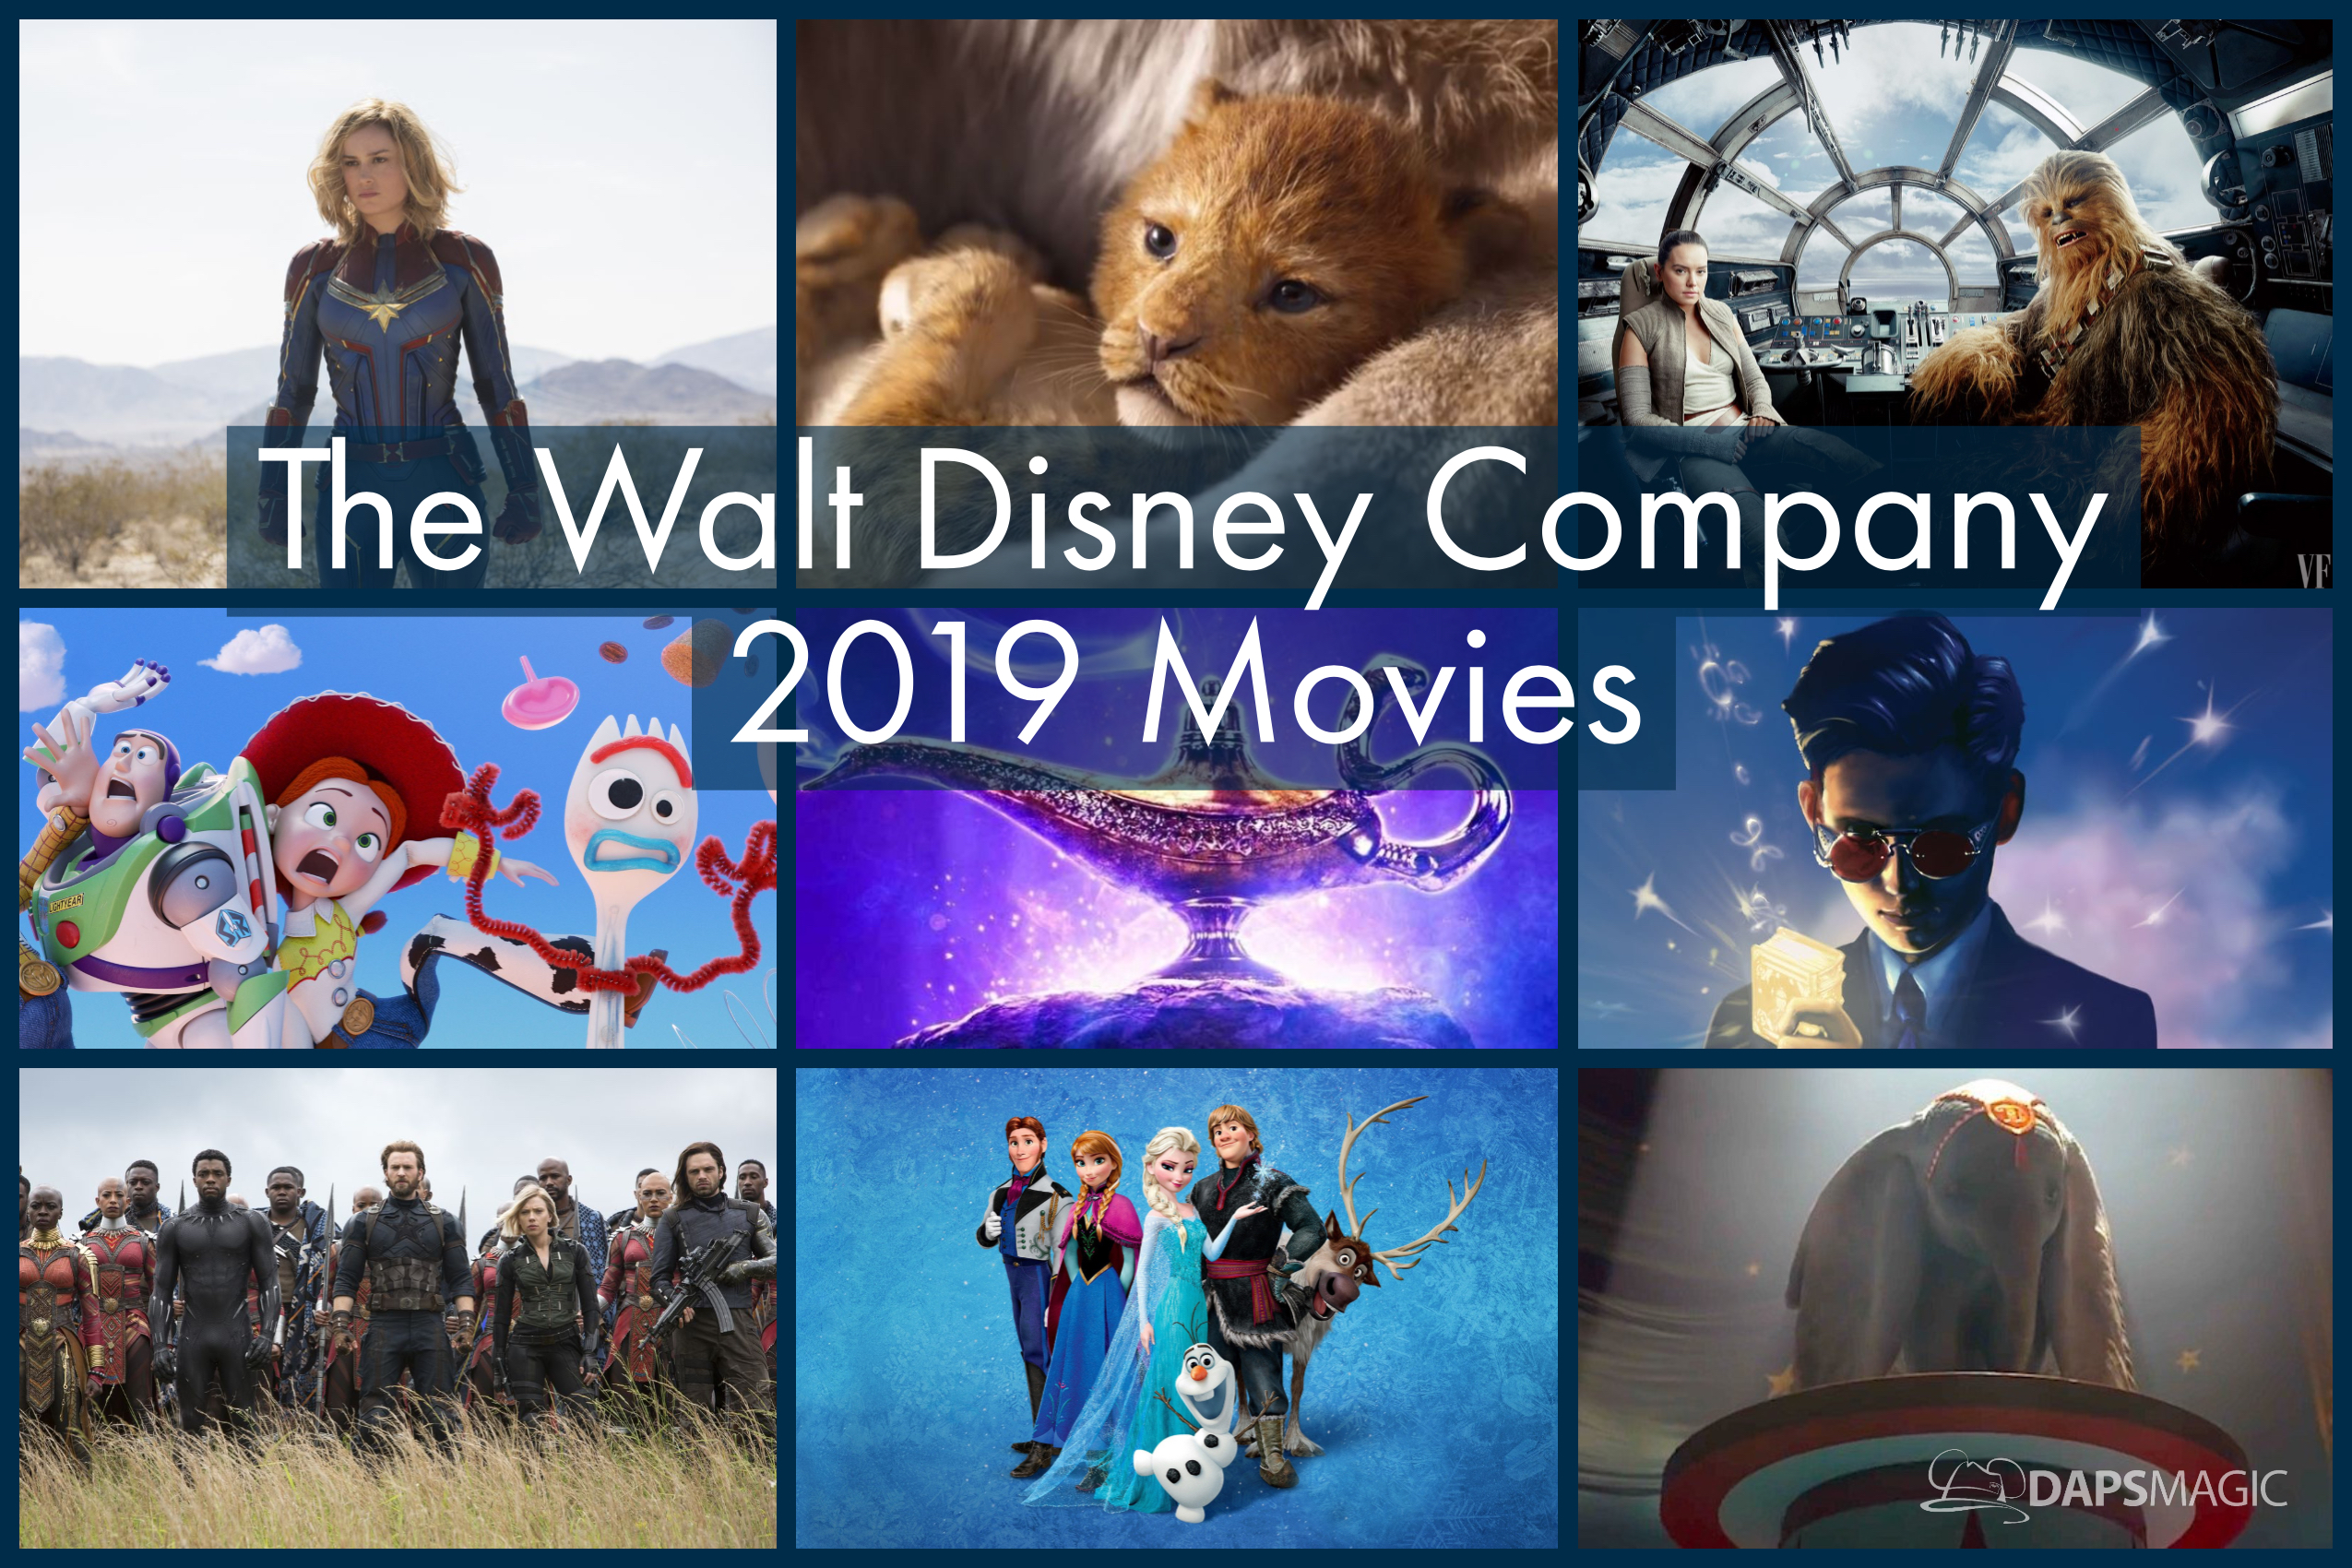 Looking Forward at The Walt Disney Company’s Schedule of Movies For 2019